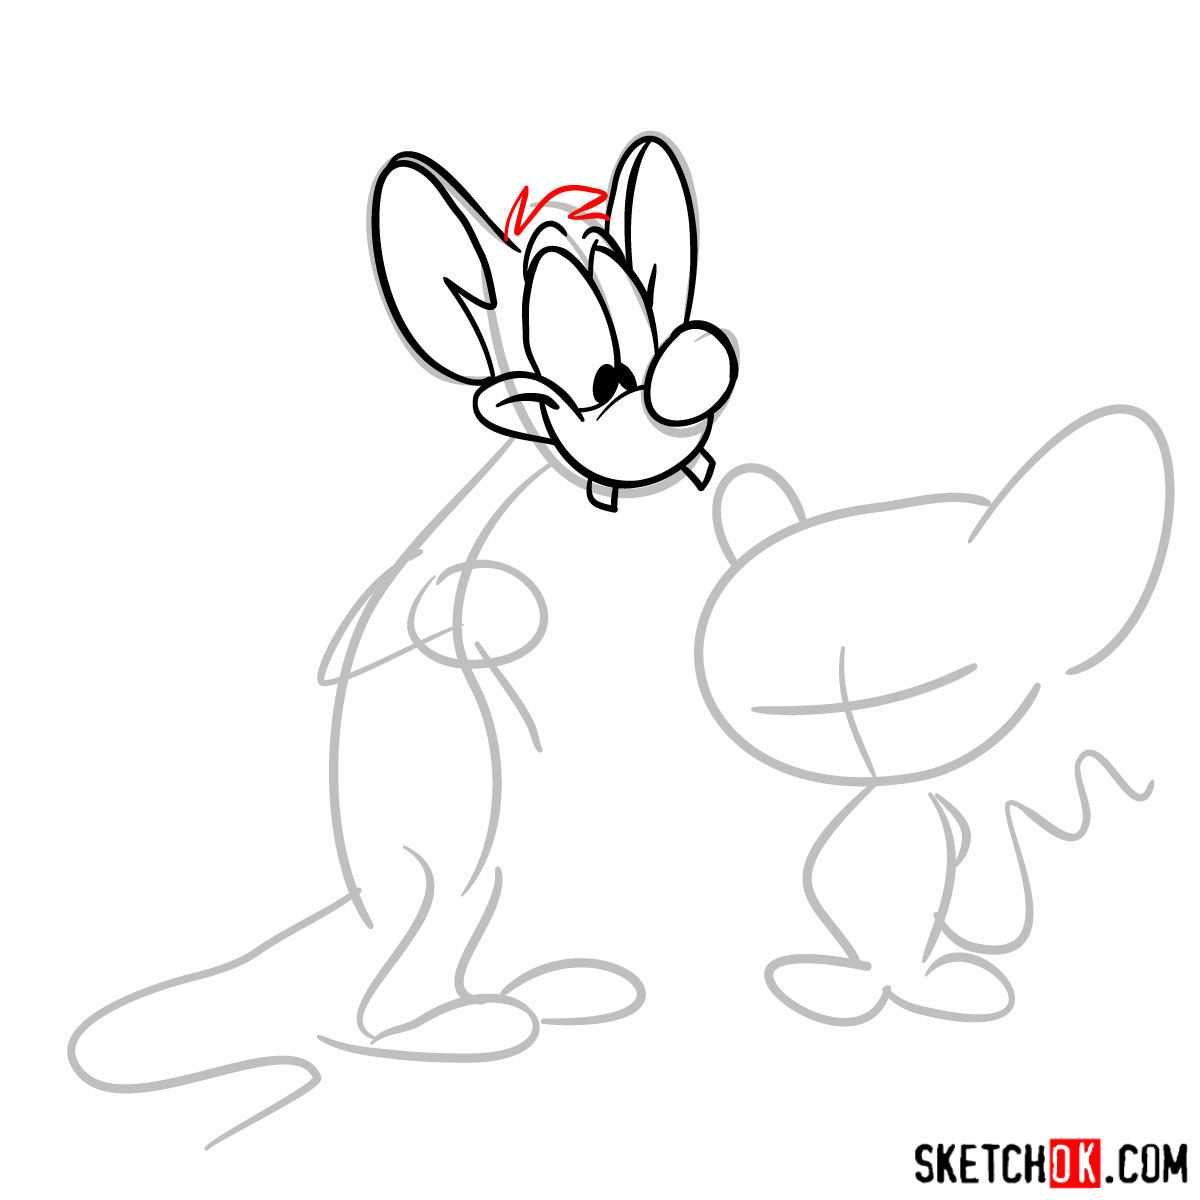 How to draw Pinky and the Brain together - step 04